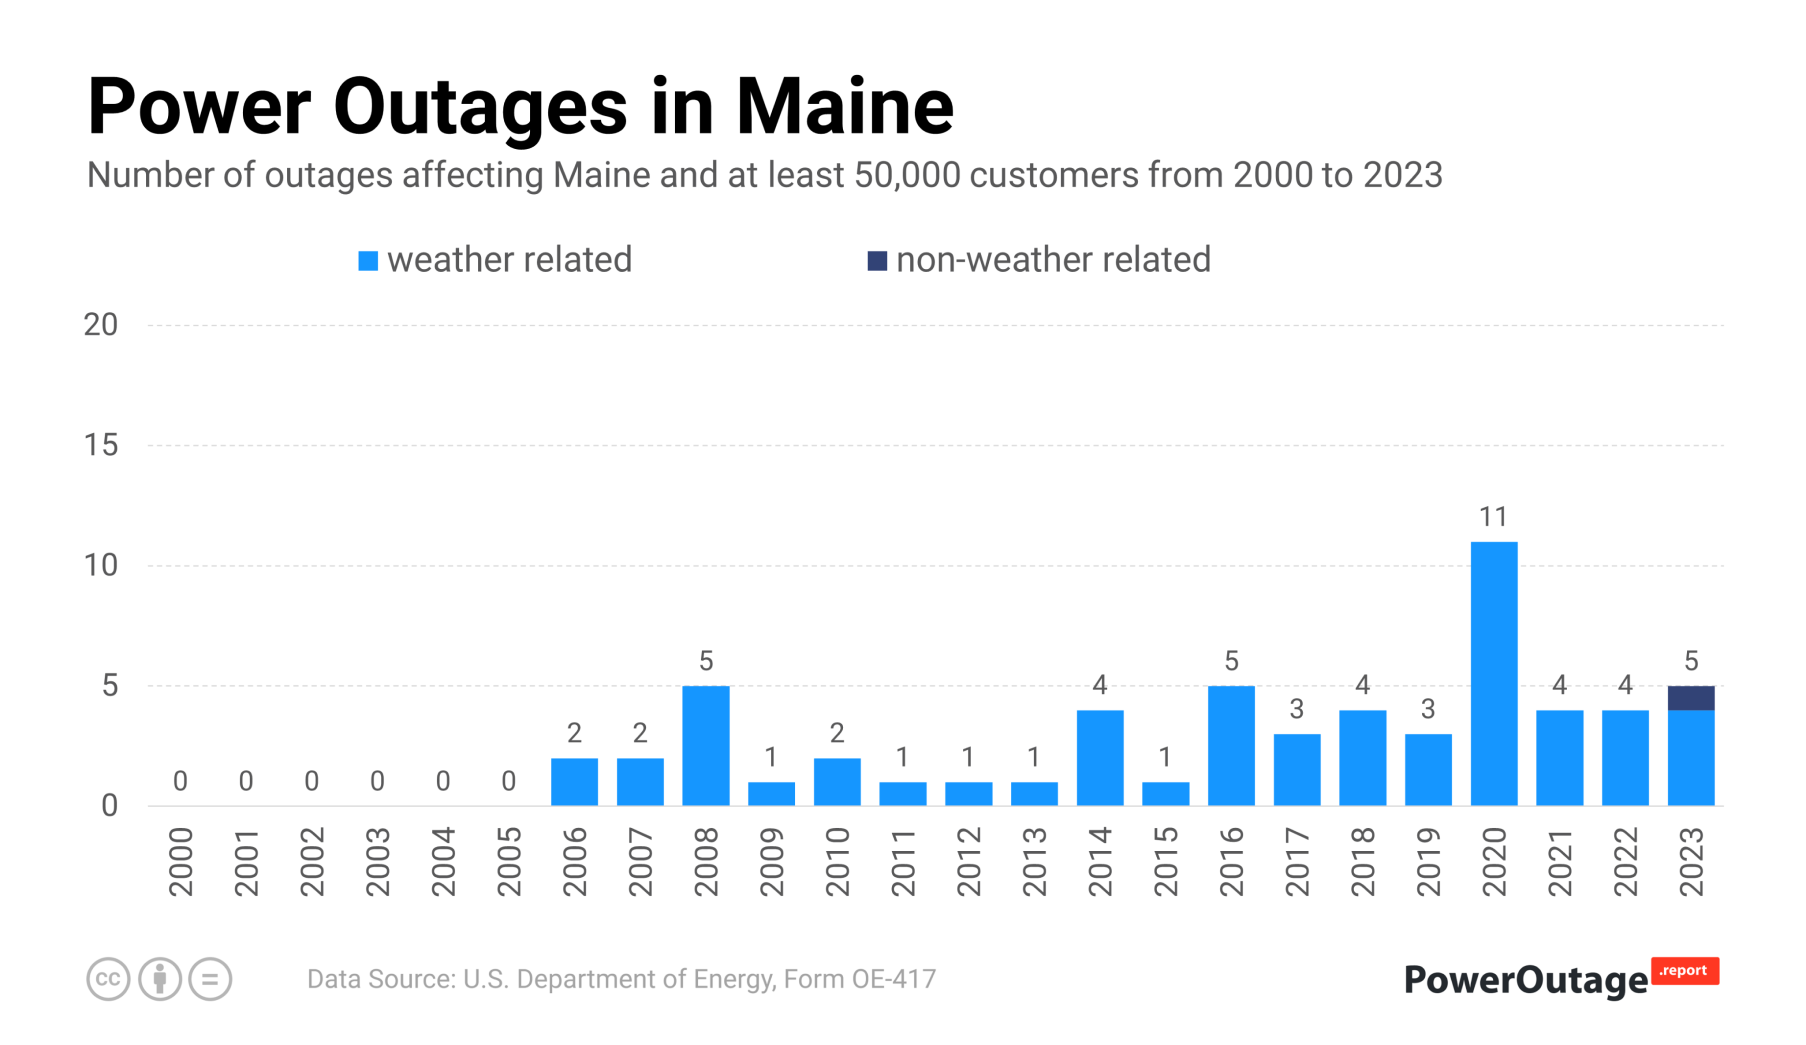 Maine Power Outage Statistics (2000 - 2022)